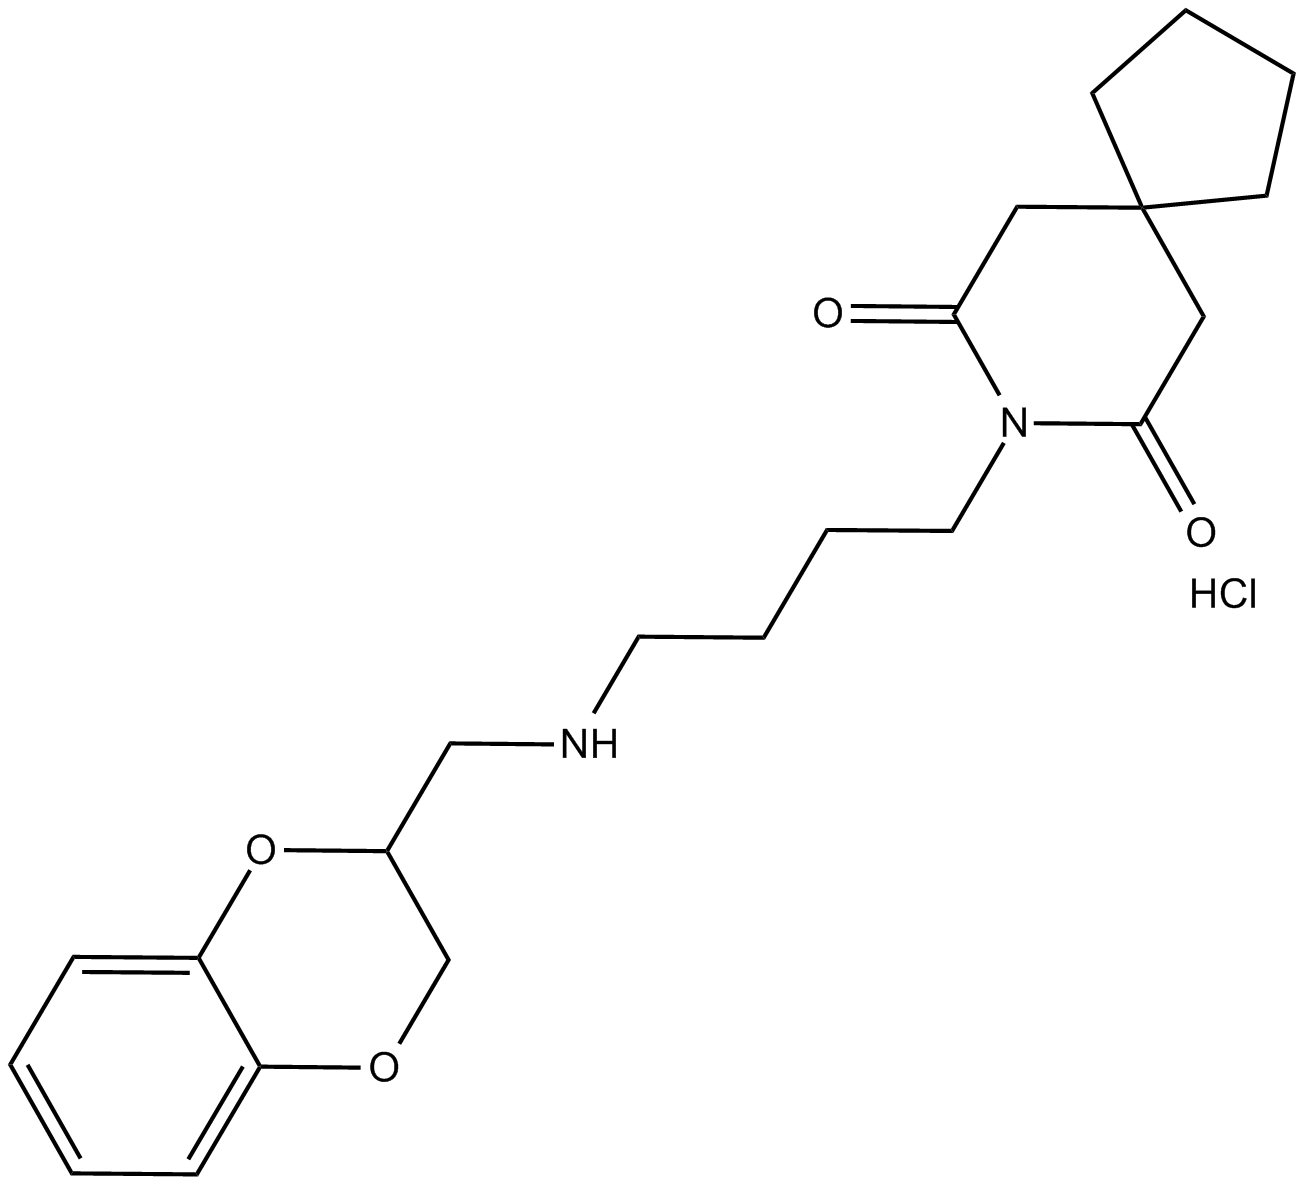 MDL 72832 hydrochloride  Chemical Structure